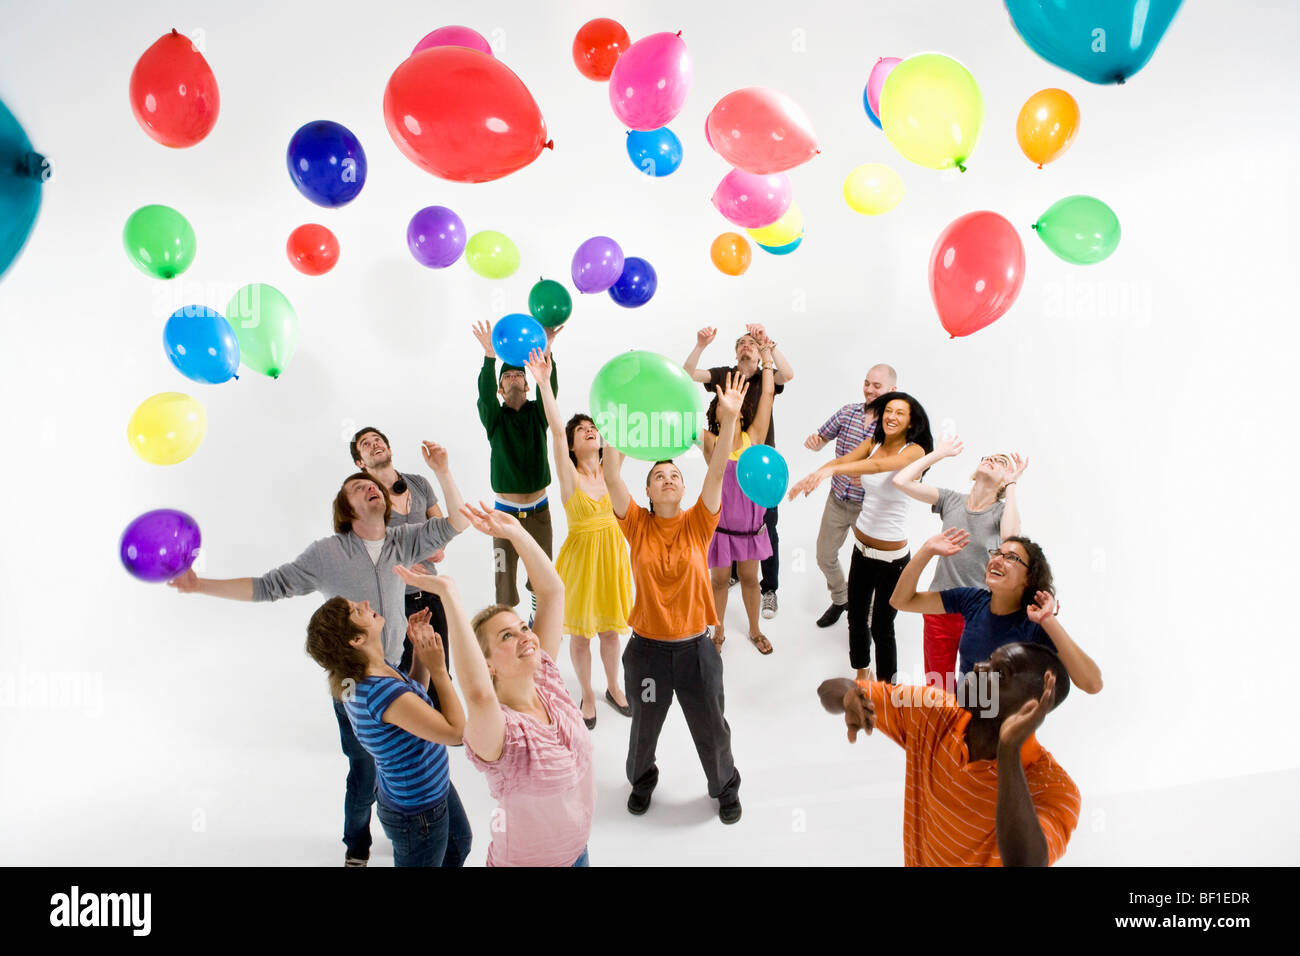 A group of men and women reaching for floating balloons Stock Photo